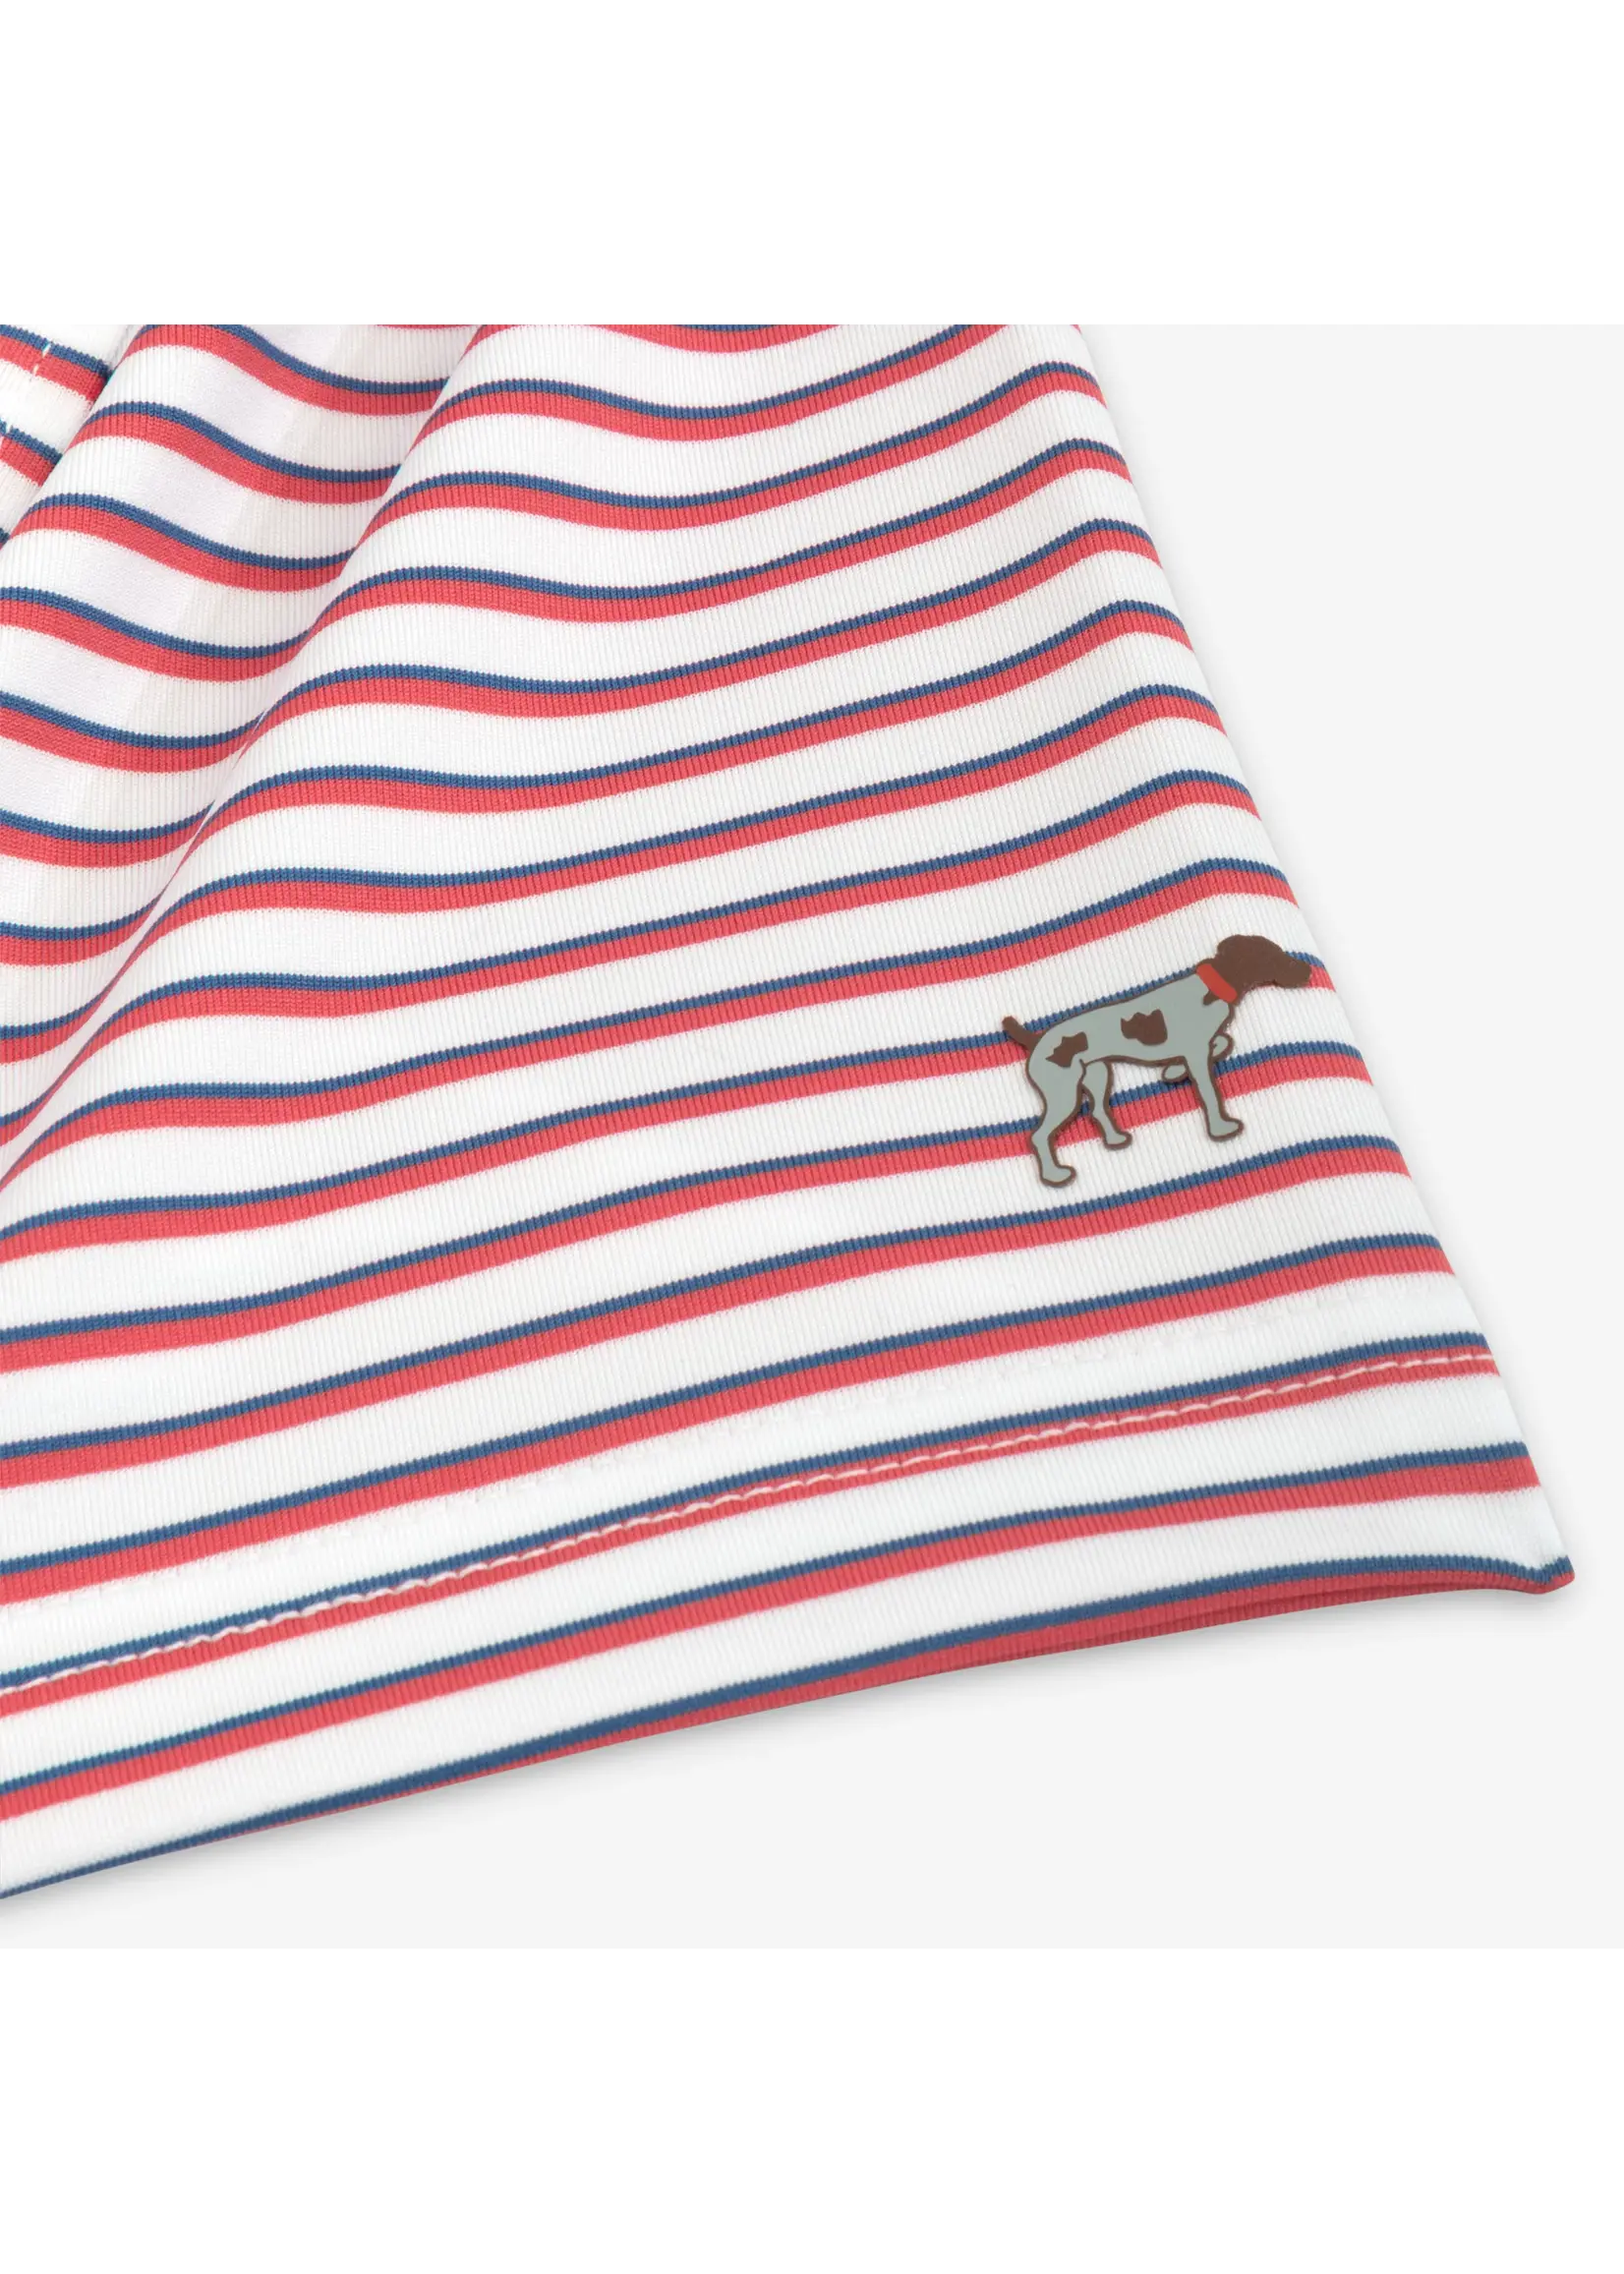 Southern Point Co. Youth Coast Stripe